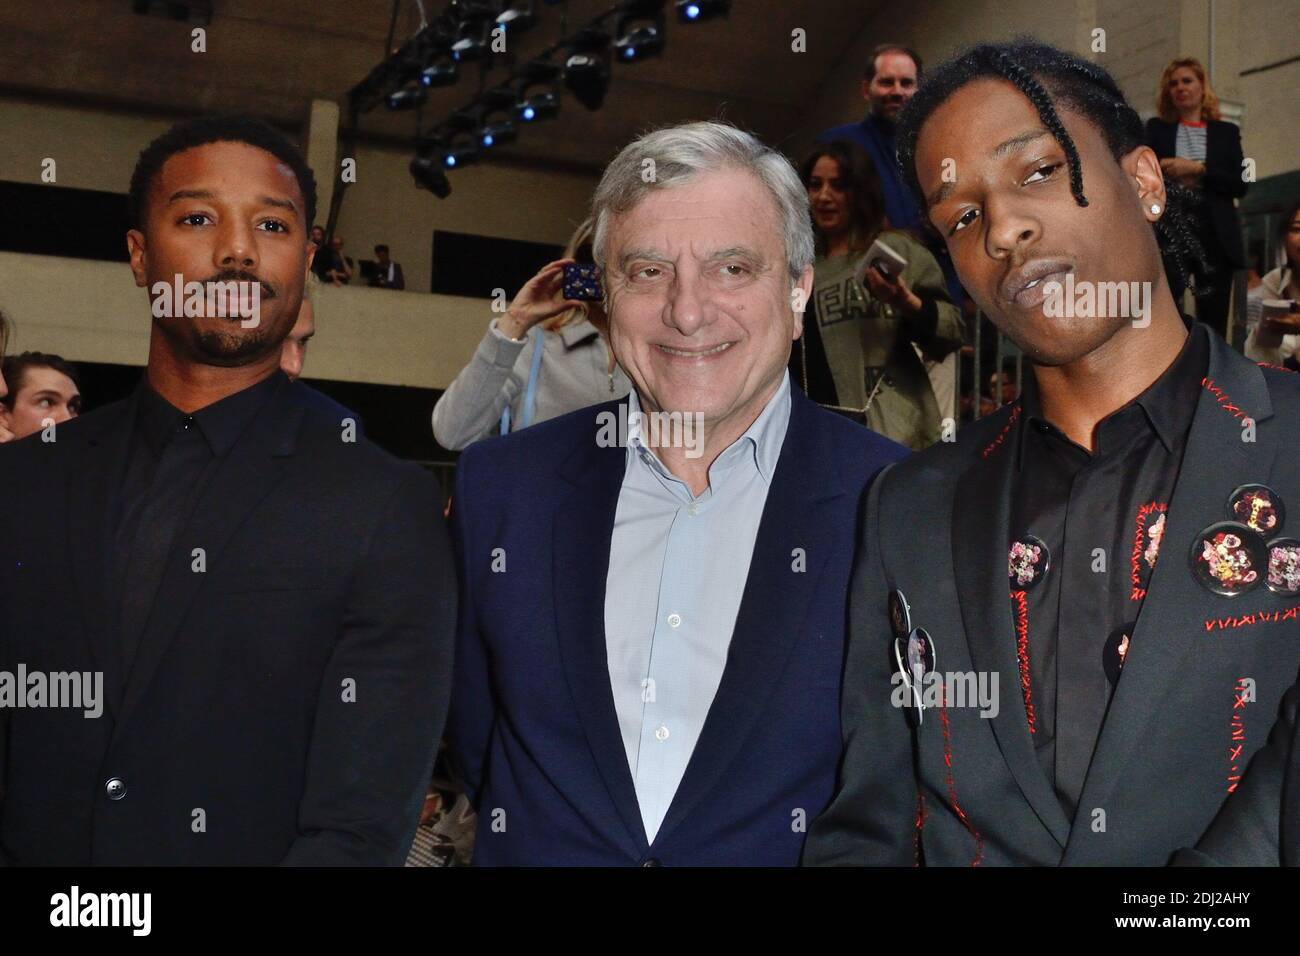 Michael B. Jordan, Sidney Toledano and ASAP Rocky arriving at the Christian  Dior Homme show during